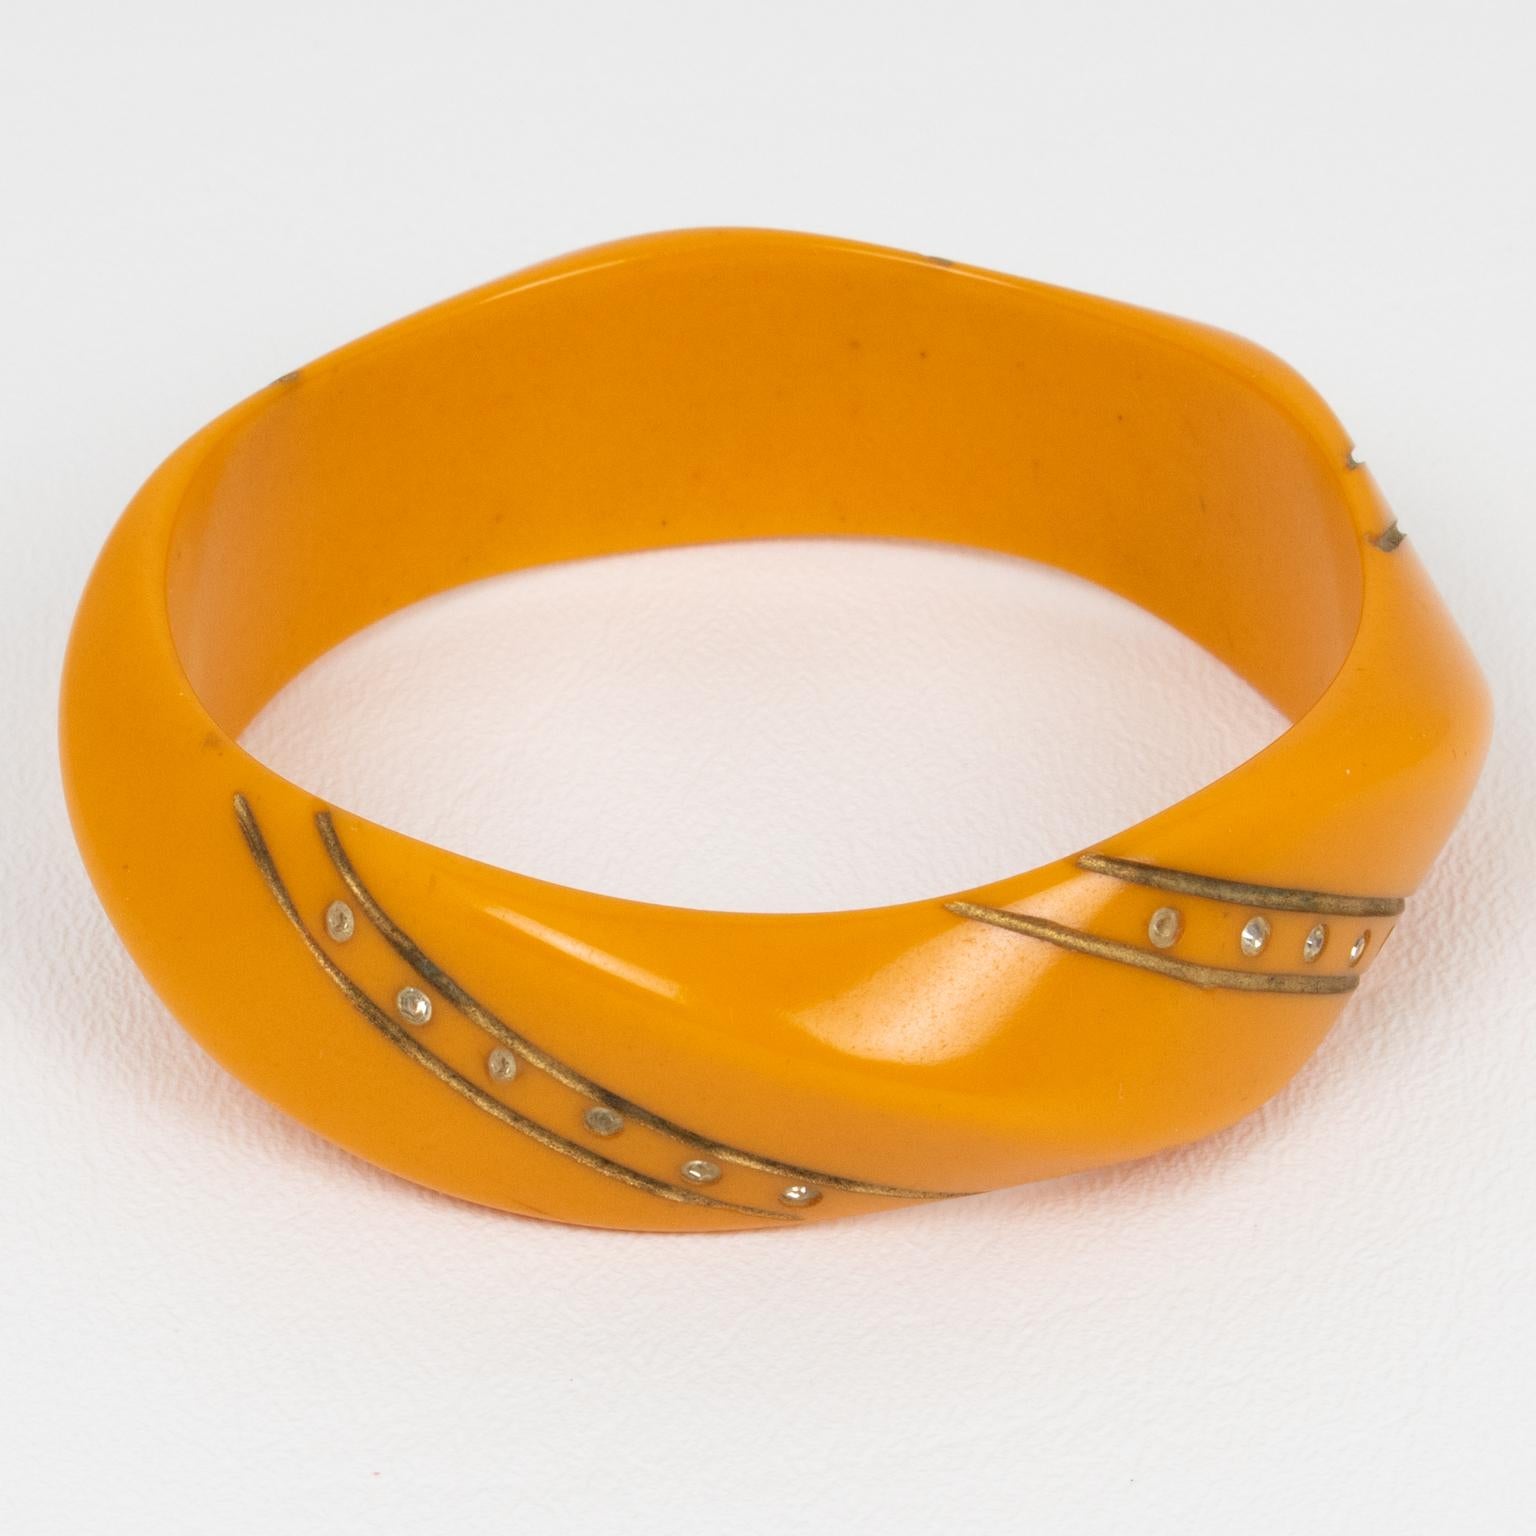 This adorable Art Deco Bakelite bracelet bangle was crafted in France in the 1930s. The piece features a chunky domed shape with wave geometric carving all around it and is ornate with gilded paint application and tiny clear crystal rhinestones.